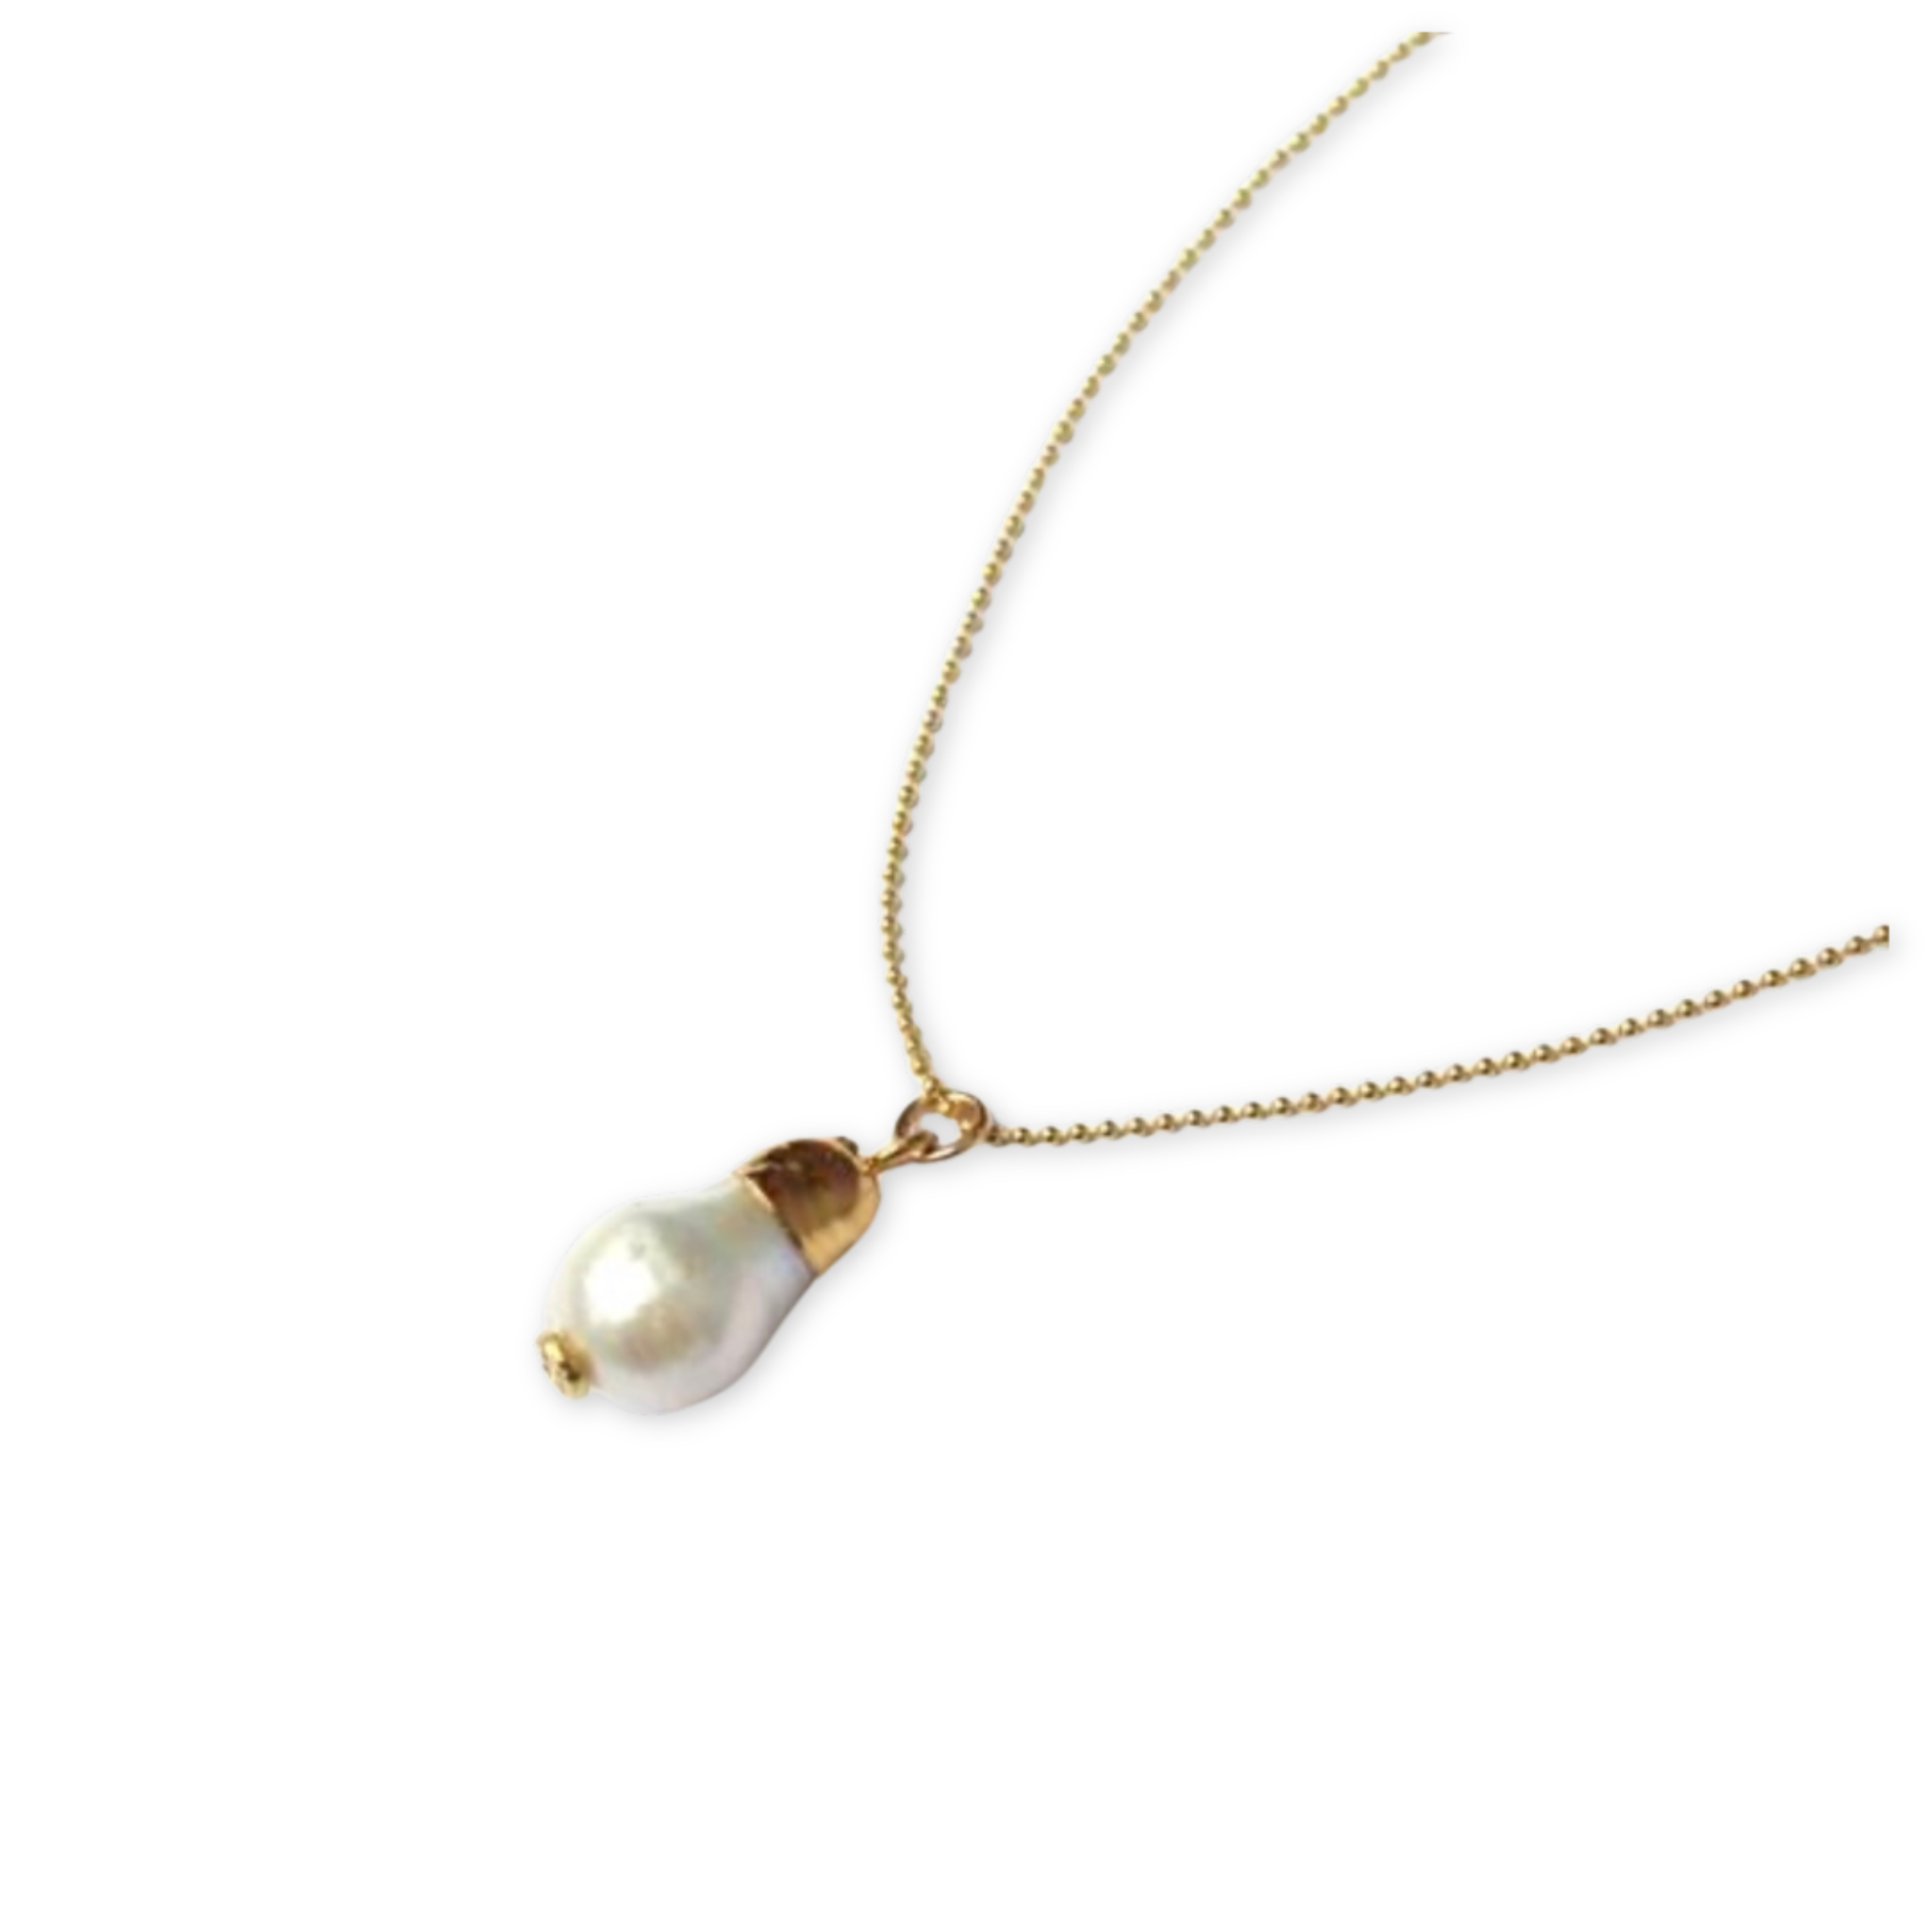 freshwater pearl pendant hanging from a thin bead chain 